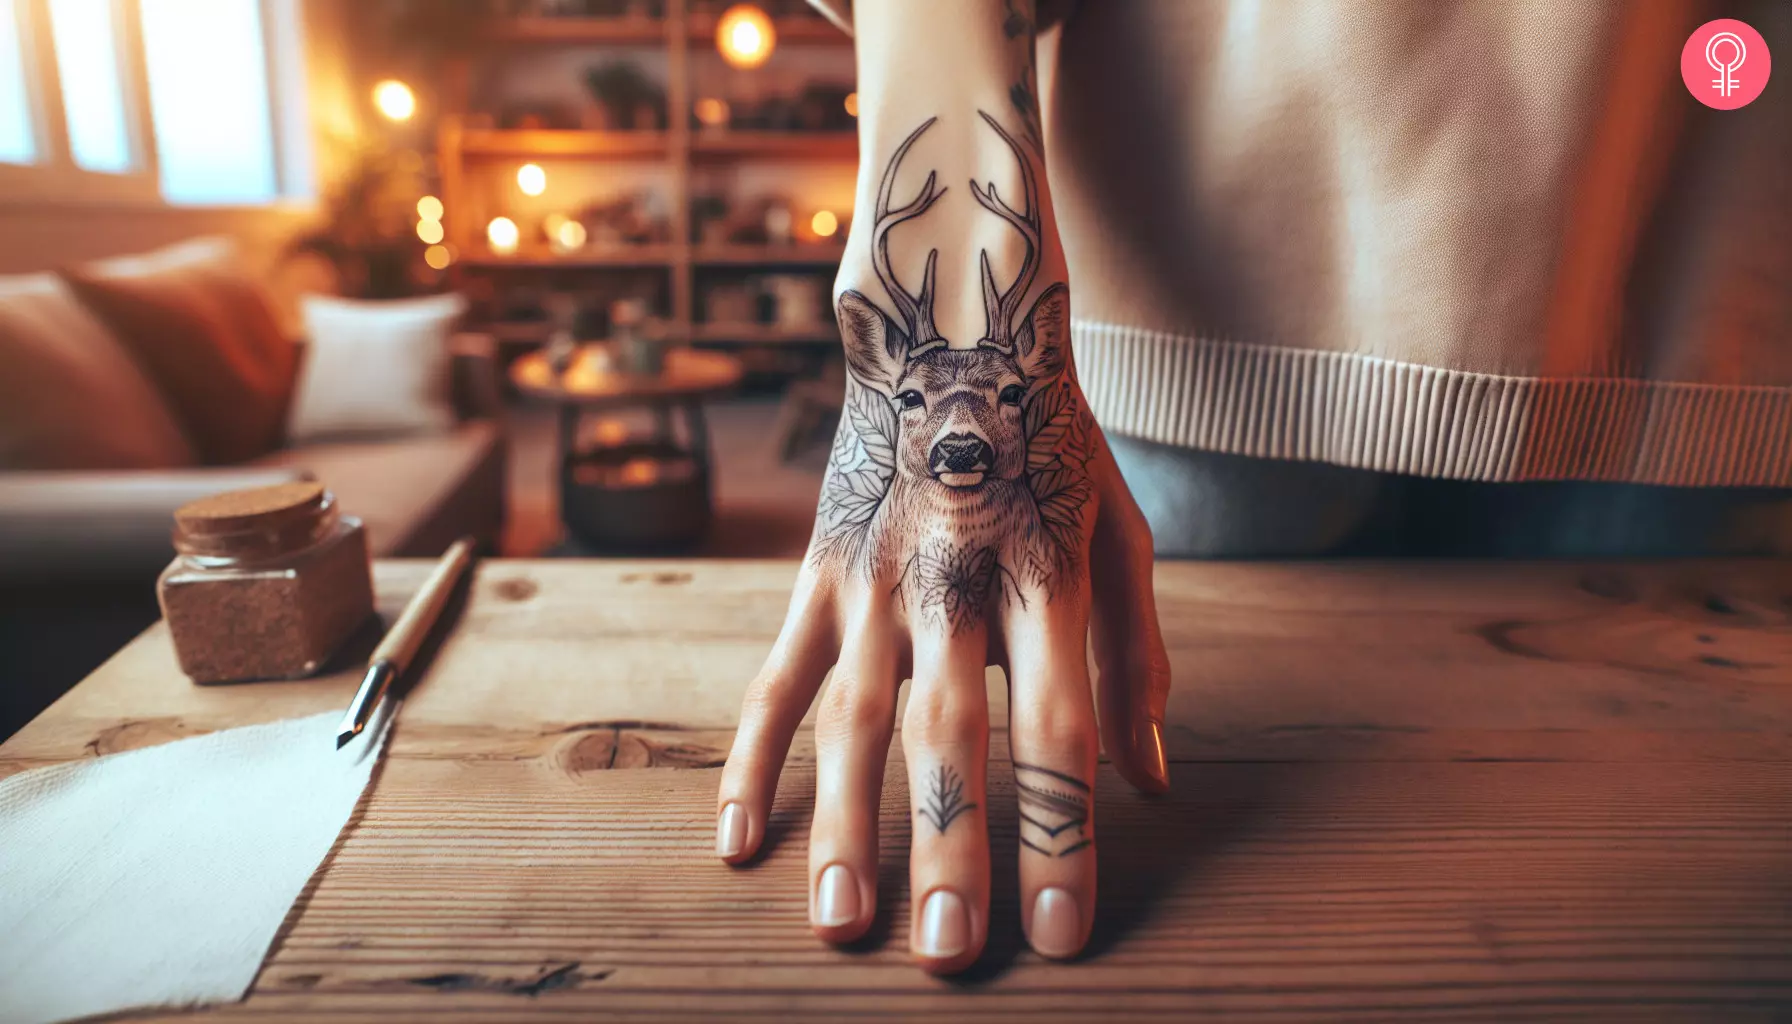 A deer hand tattoo on the back of the palm